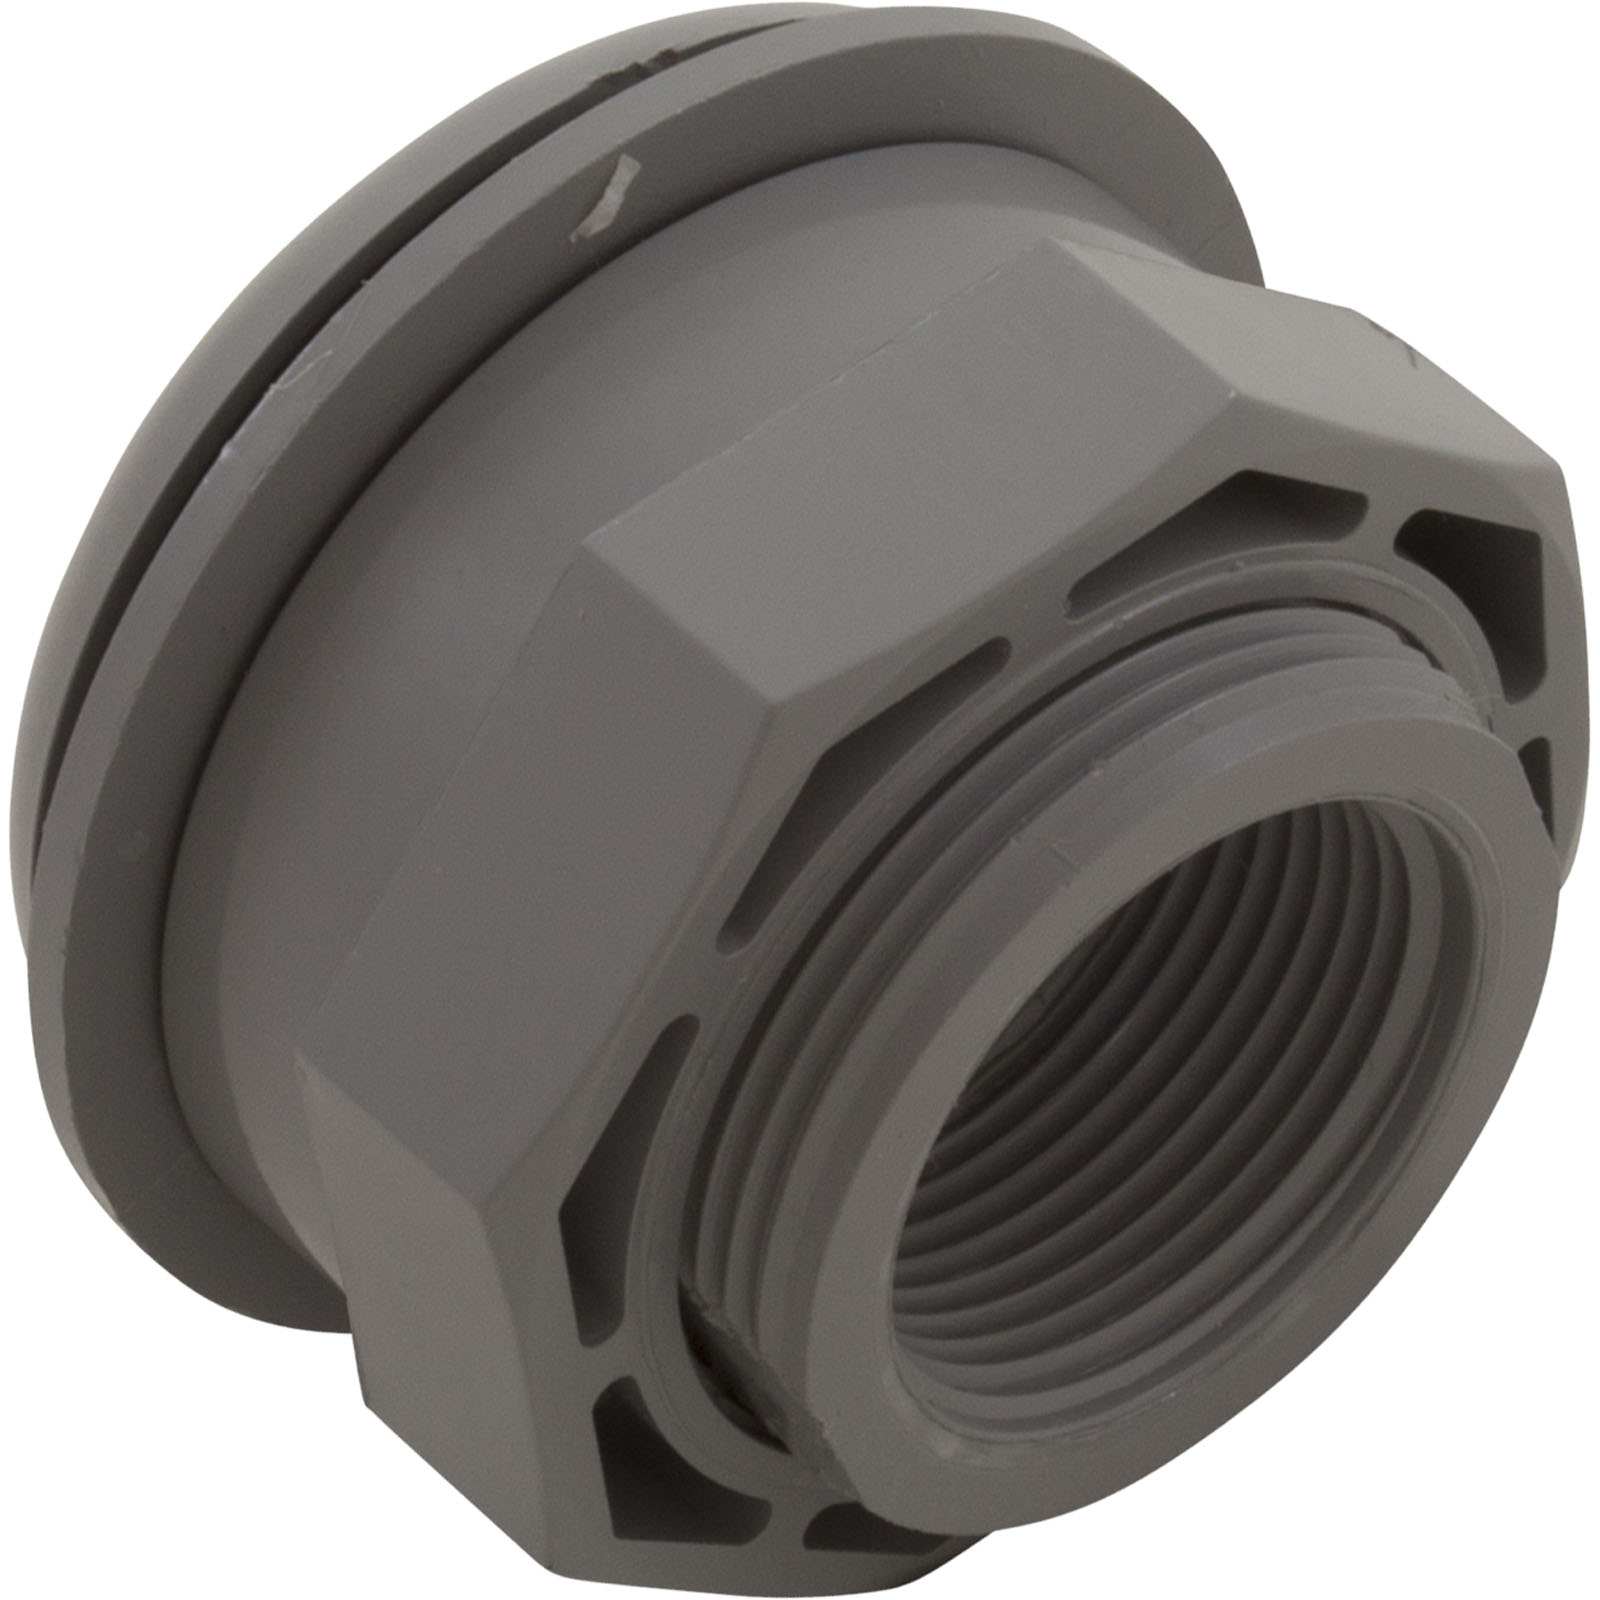 Picture of 25522-001-000 Wall Return Fitting CMP 1-1/2" x 1-1/2" Vinyl Gray